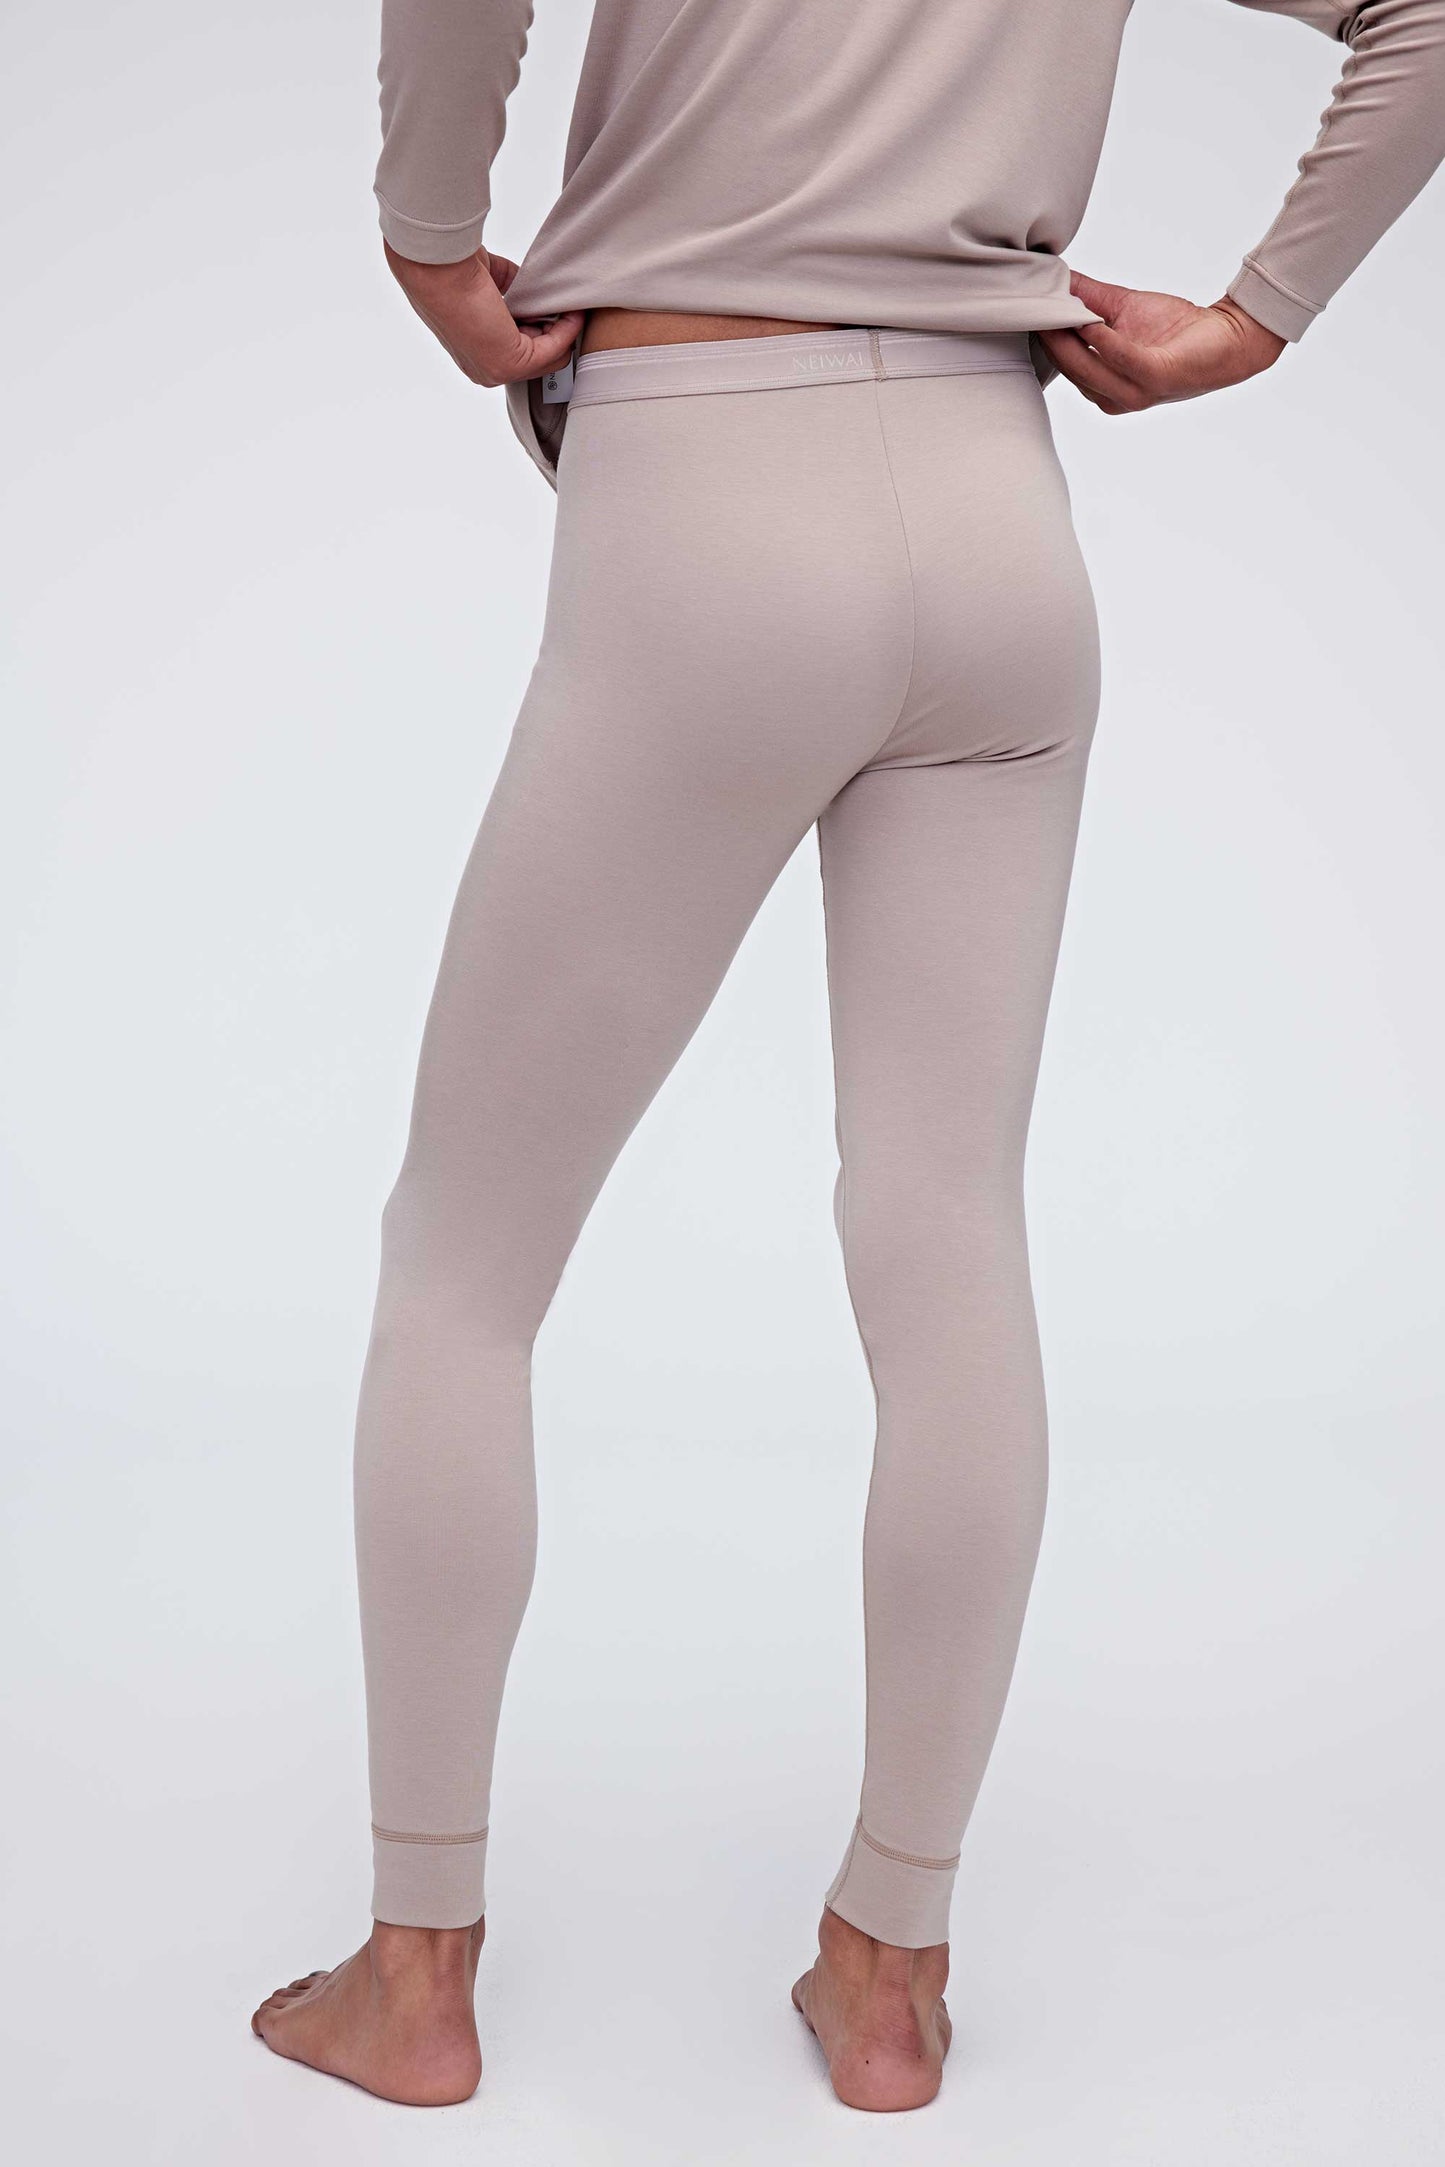 Back view of the ginger gray thermal pants